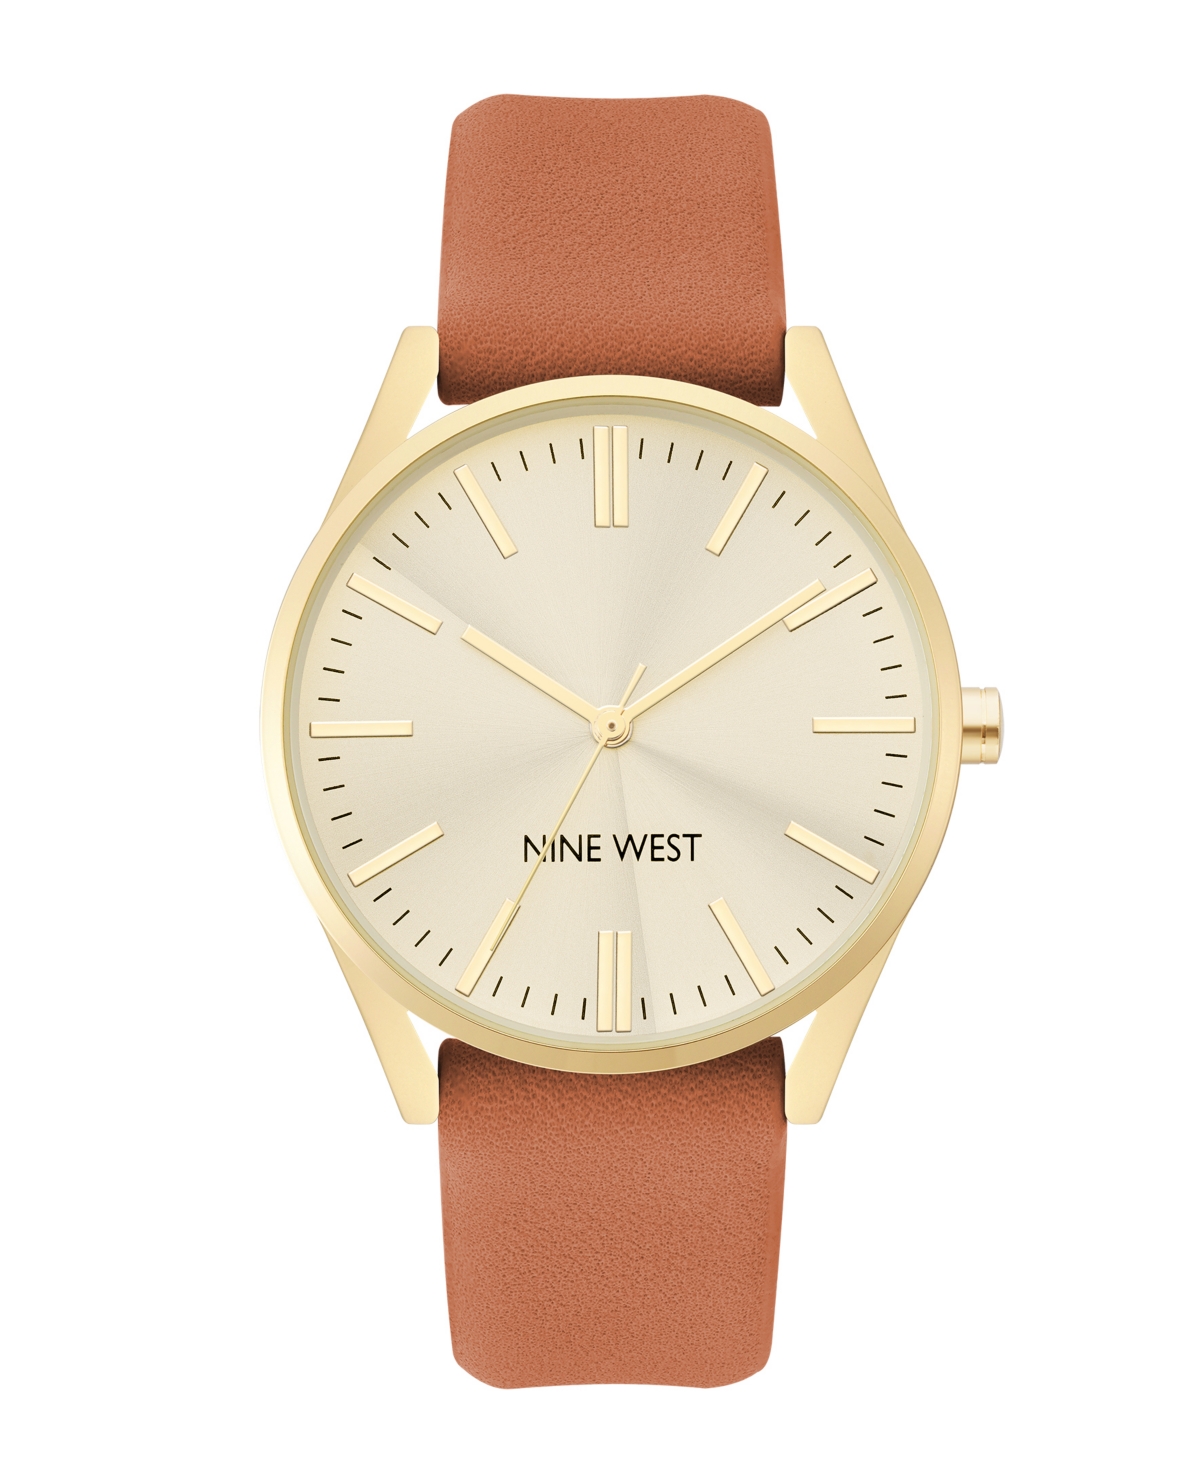 Nine West Women's Quartz Honey Brown Faux Leather Band Watch, 36mm In Brown,gold-tone